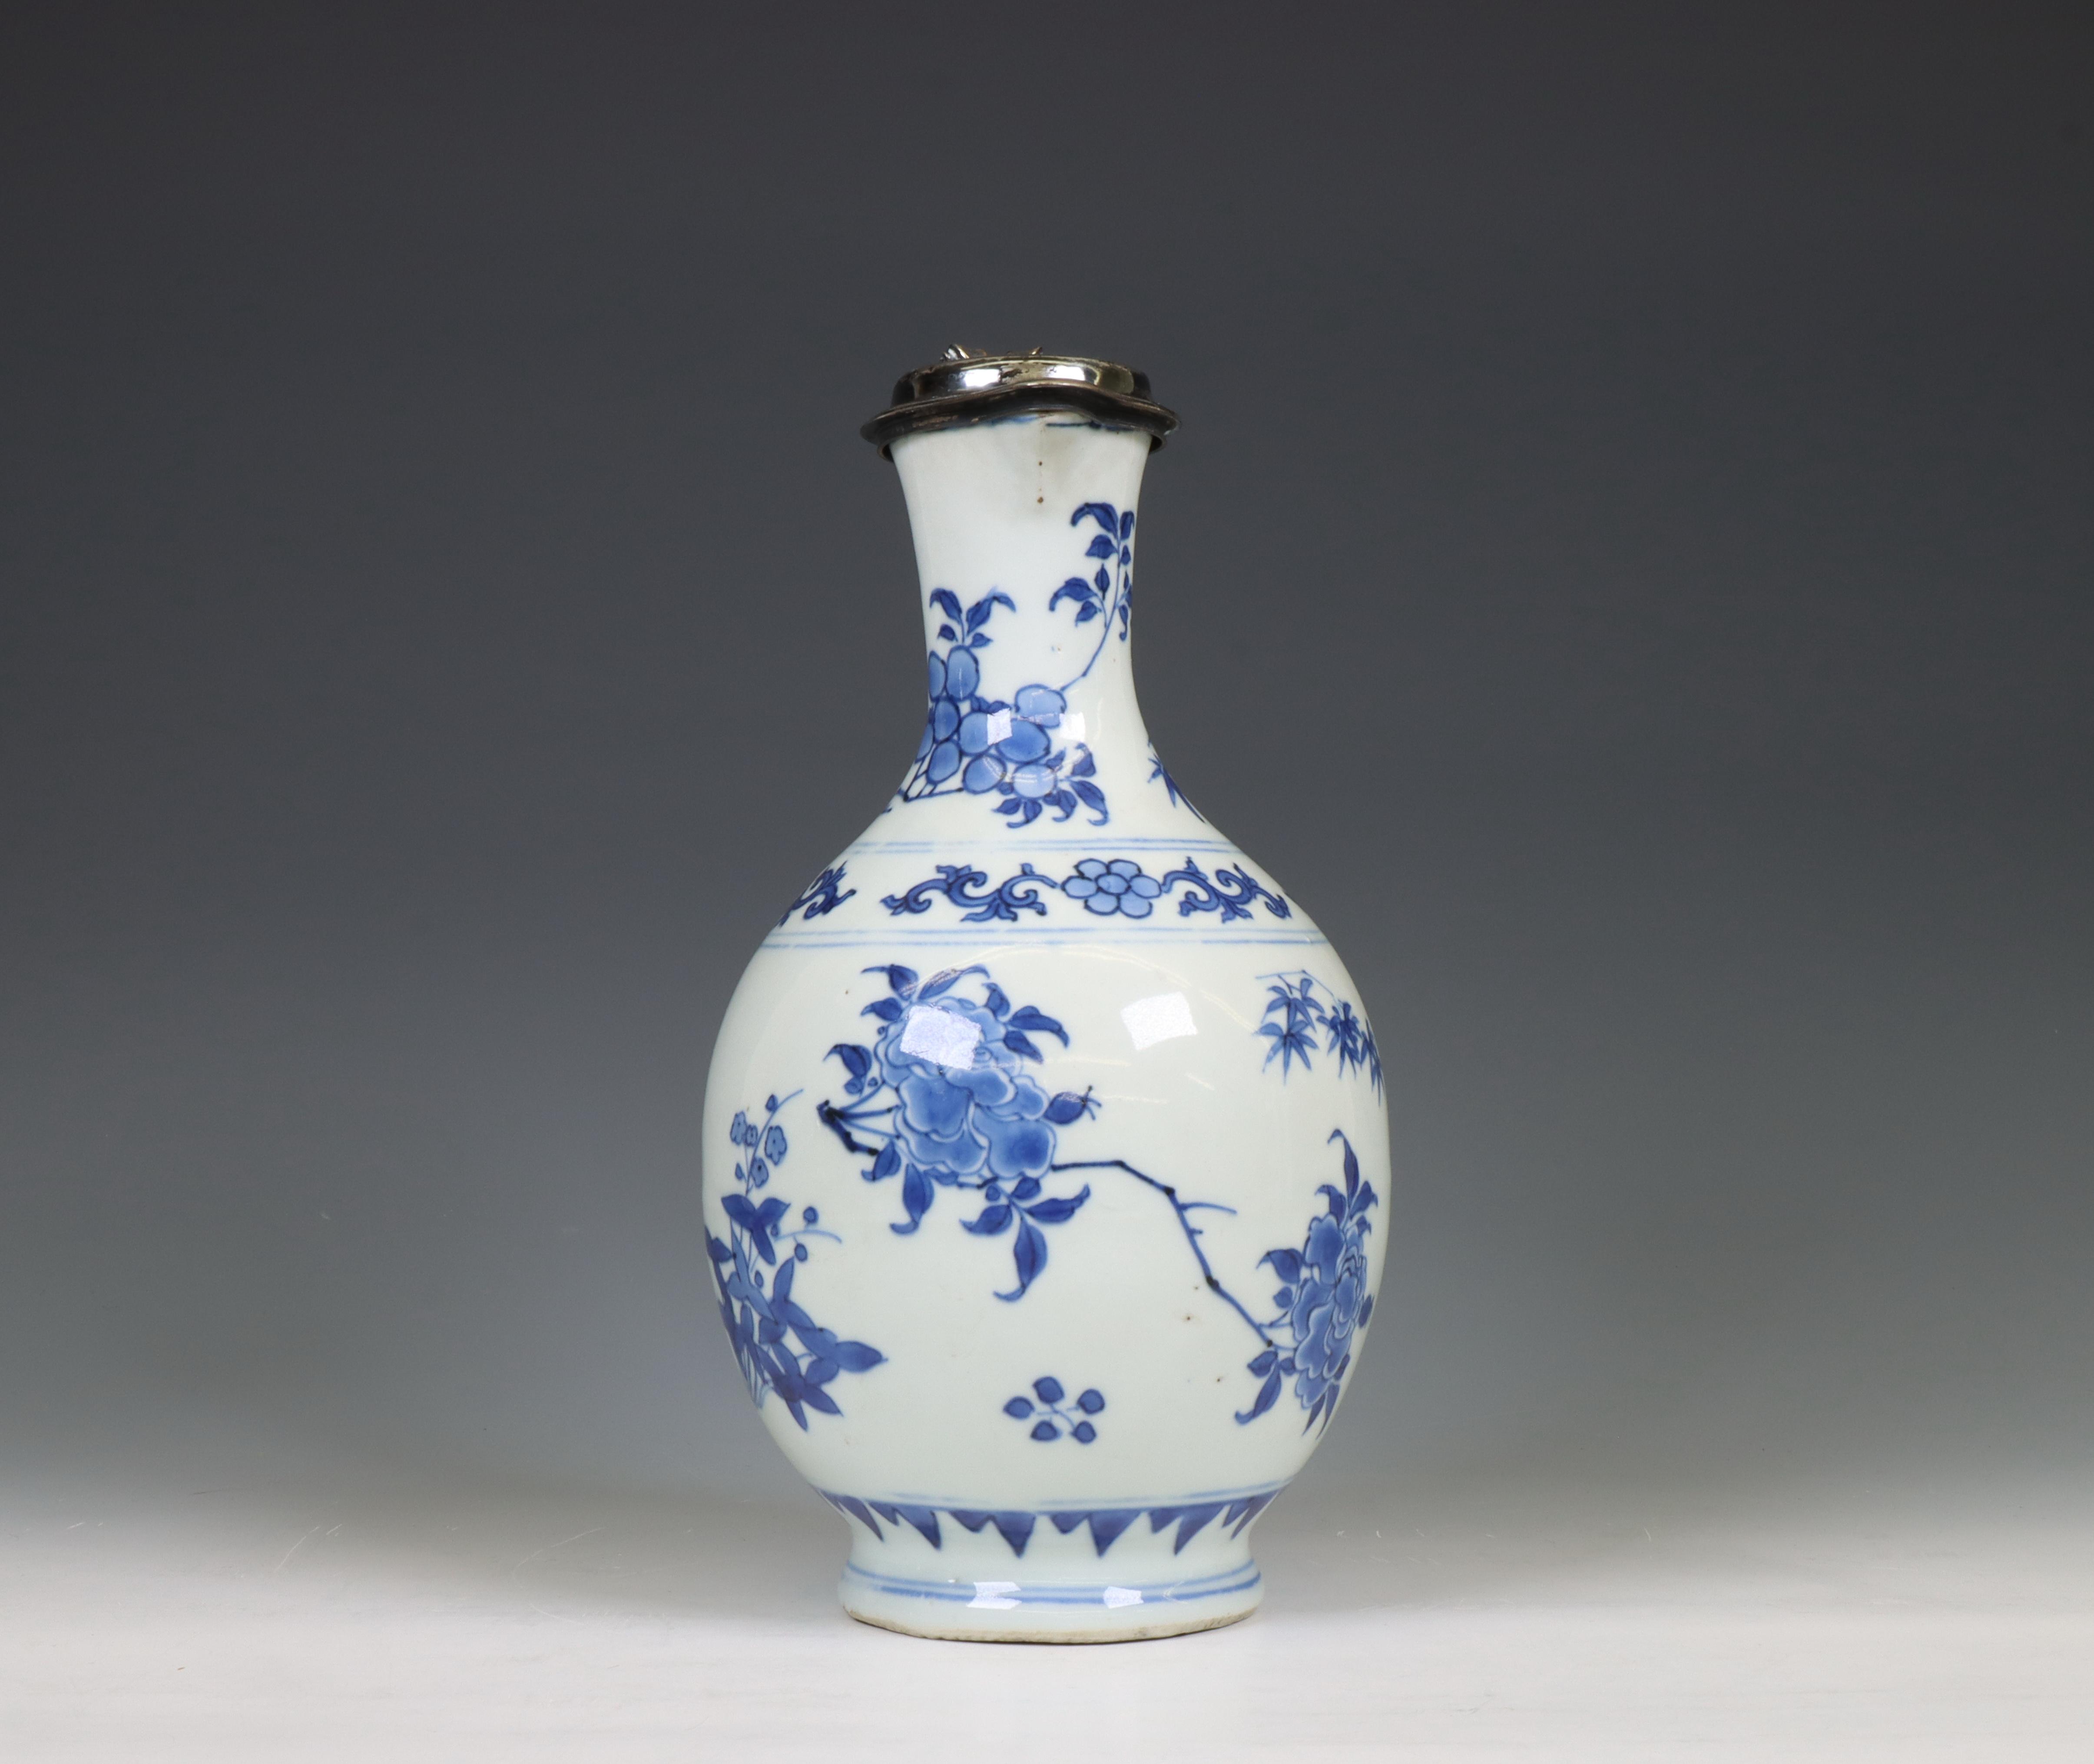 China, a Transitional silver-mounted blue and white porcelain ewer, mid 17th century, the silver lat - Image 3 of 6